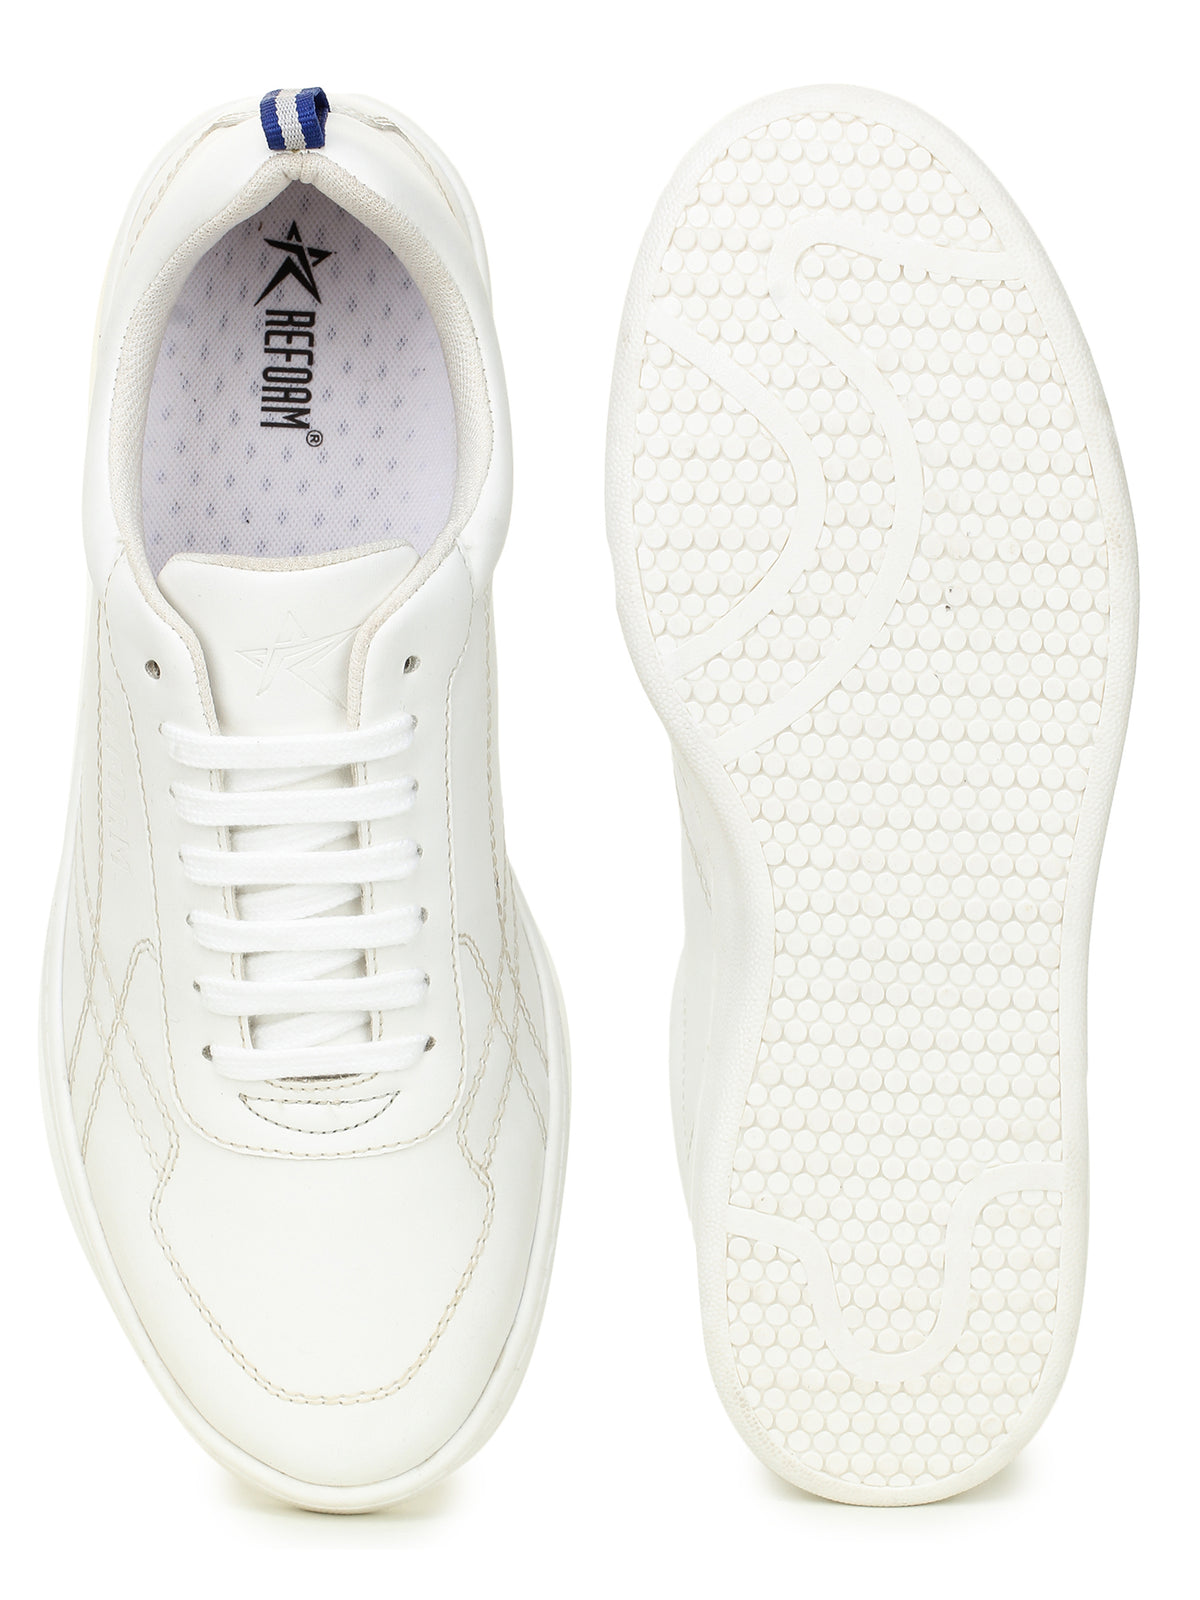 Buy Labbin Mens Casual Shoes in Canvas White Sneakers Lightweight Shoes  White 7 at Amazon.in